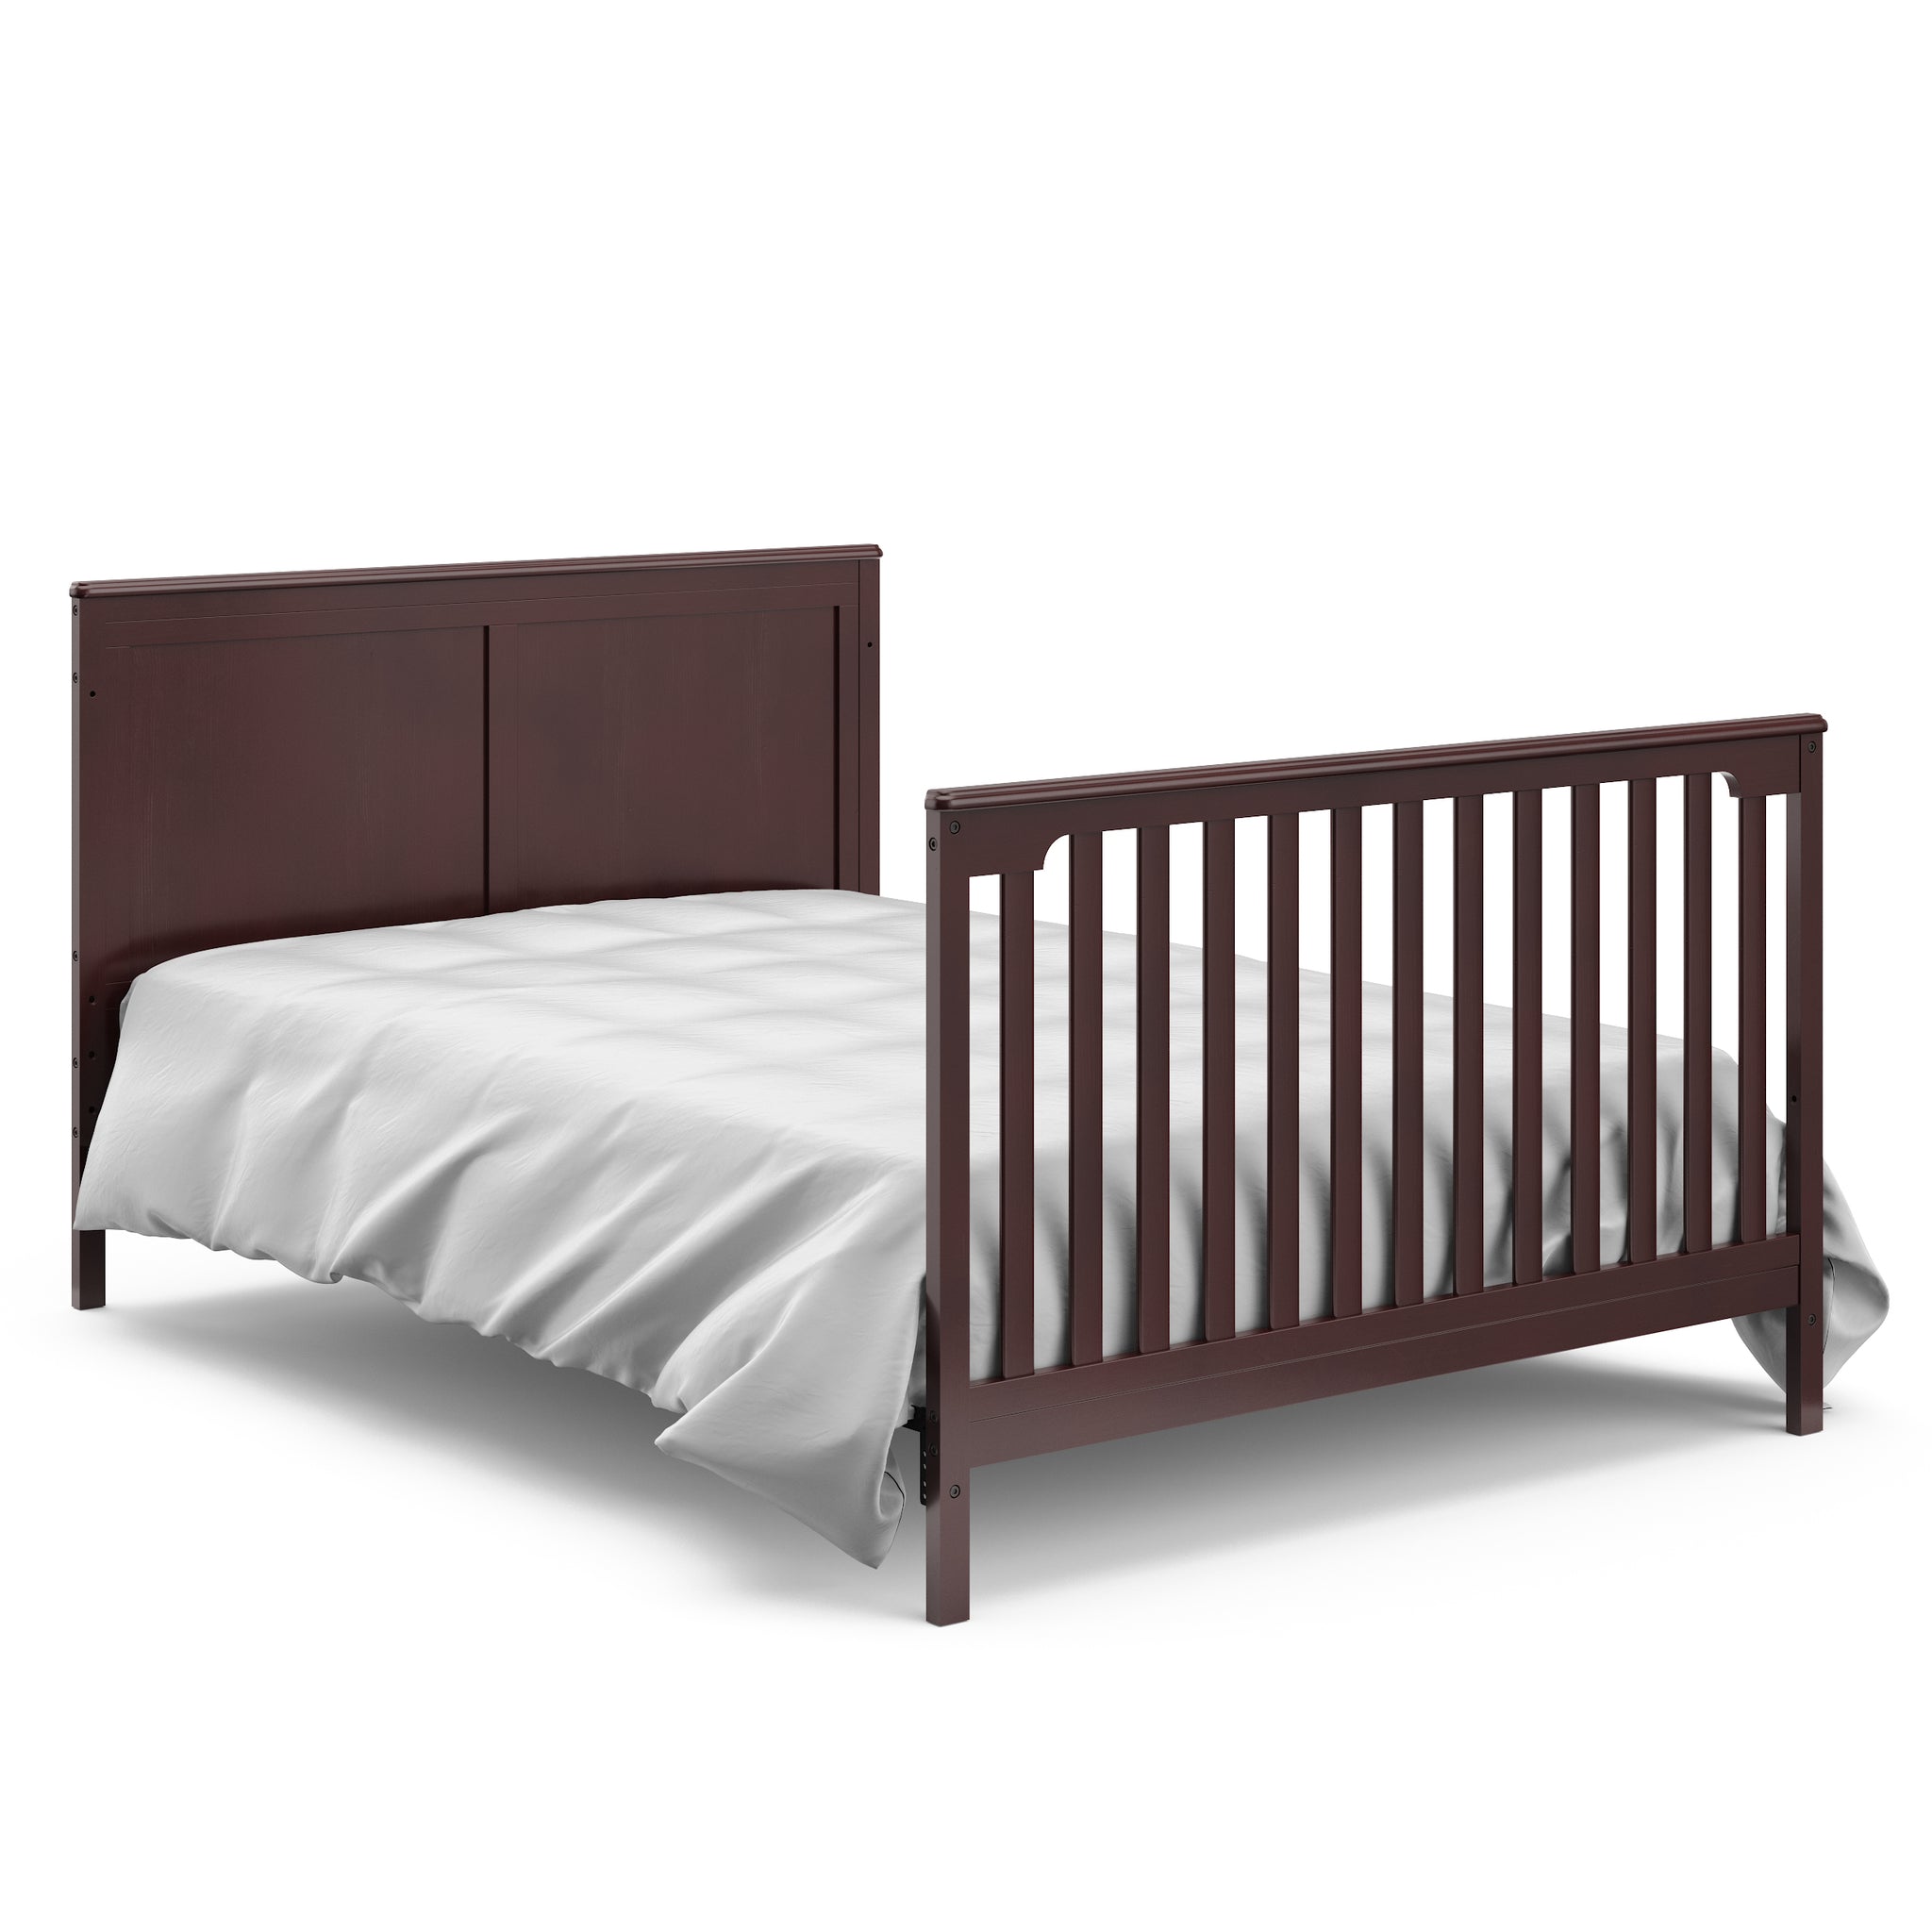 espresso crib in full-size bed with headboard and footboard conversion